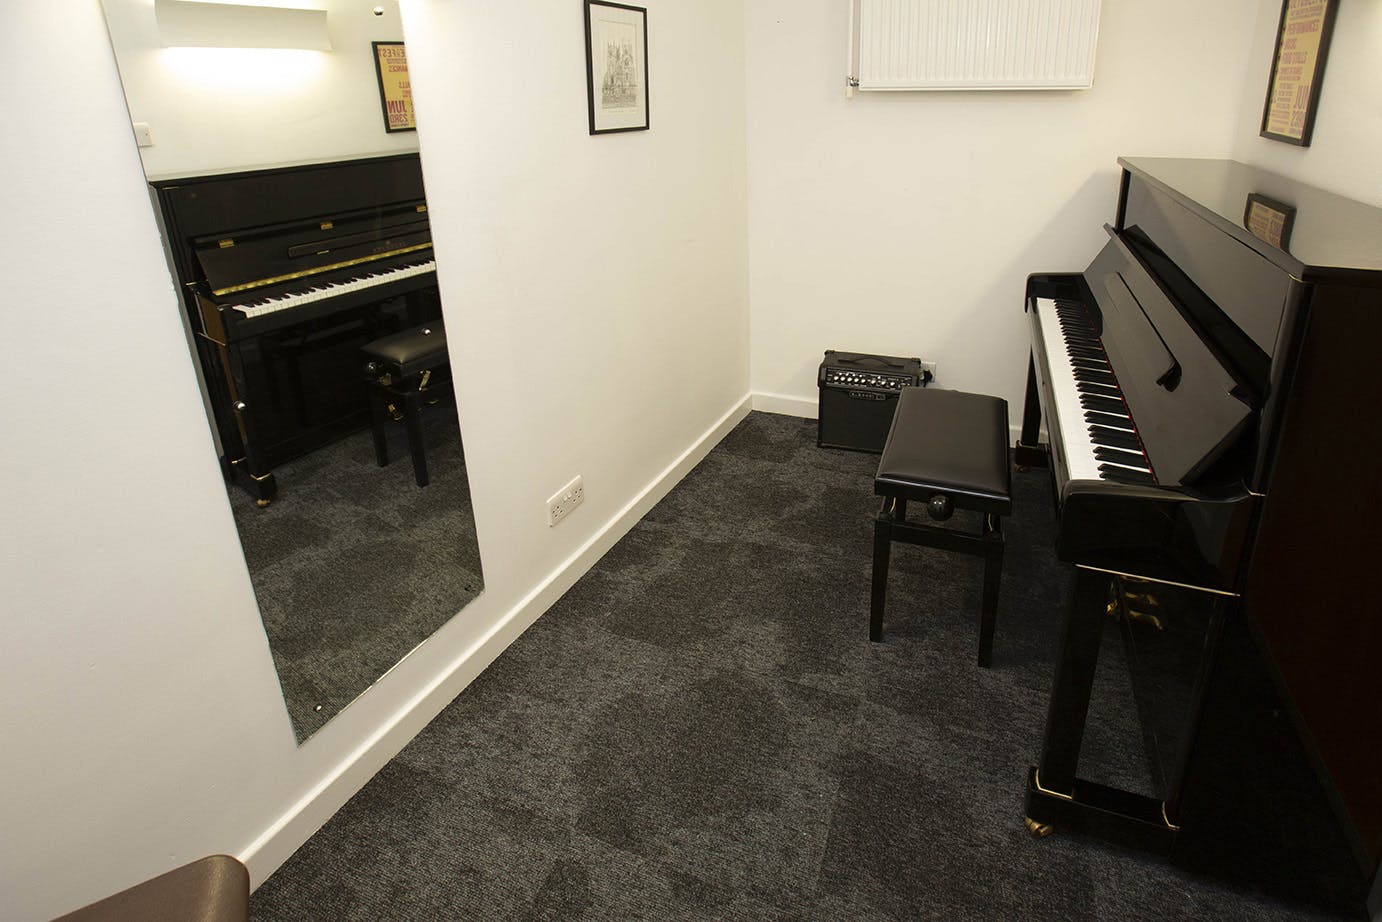 View of the music practice room